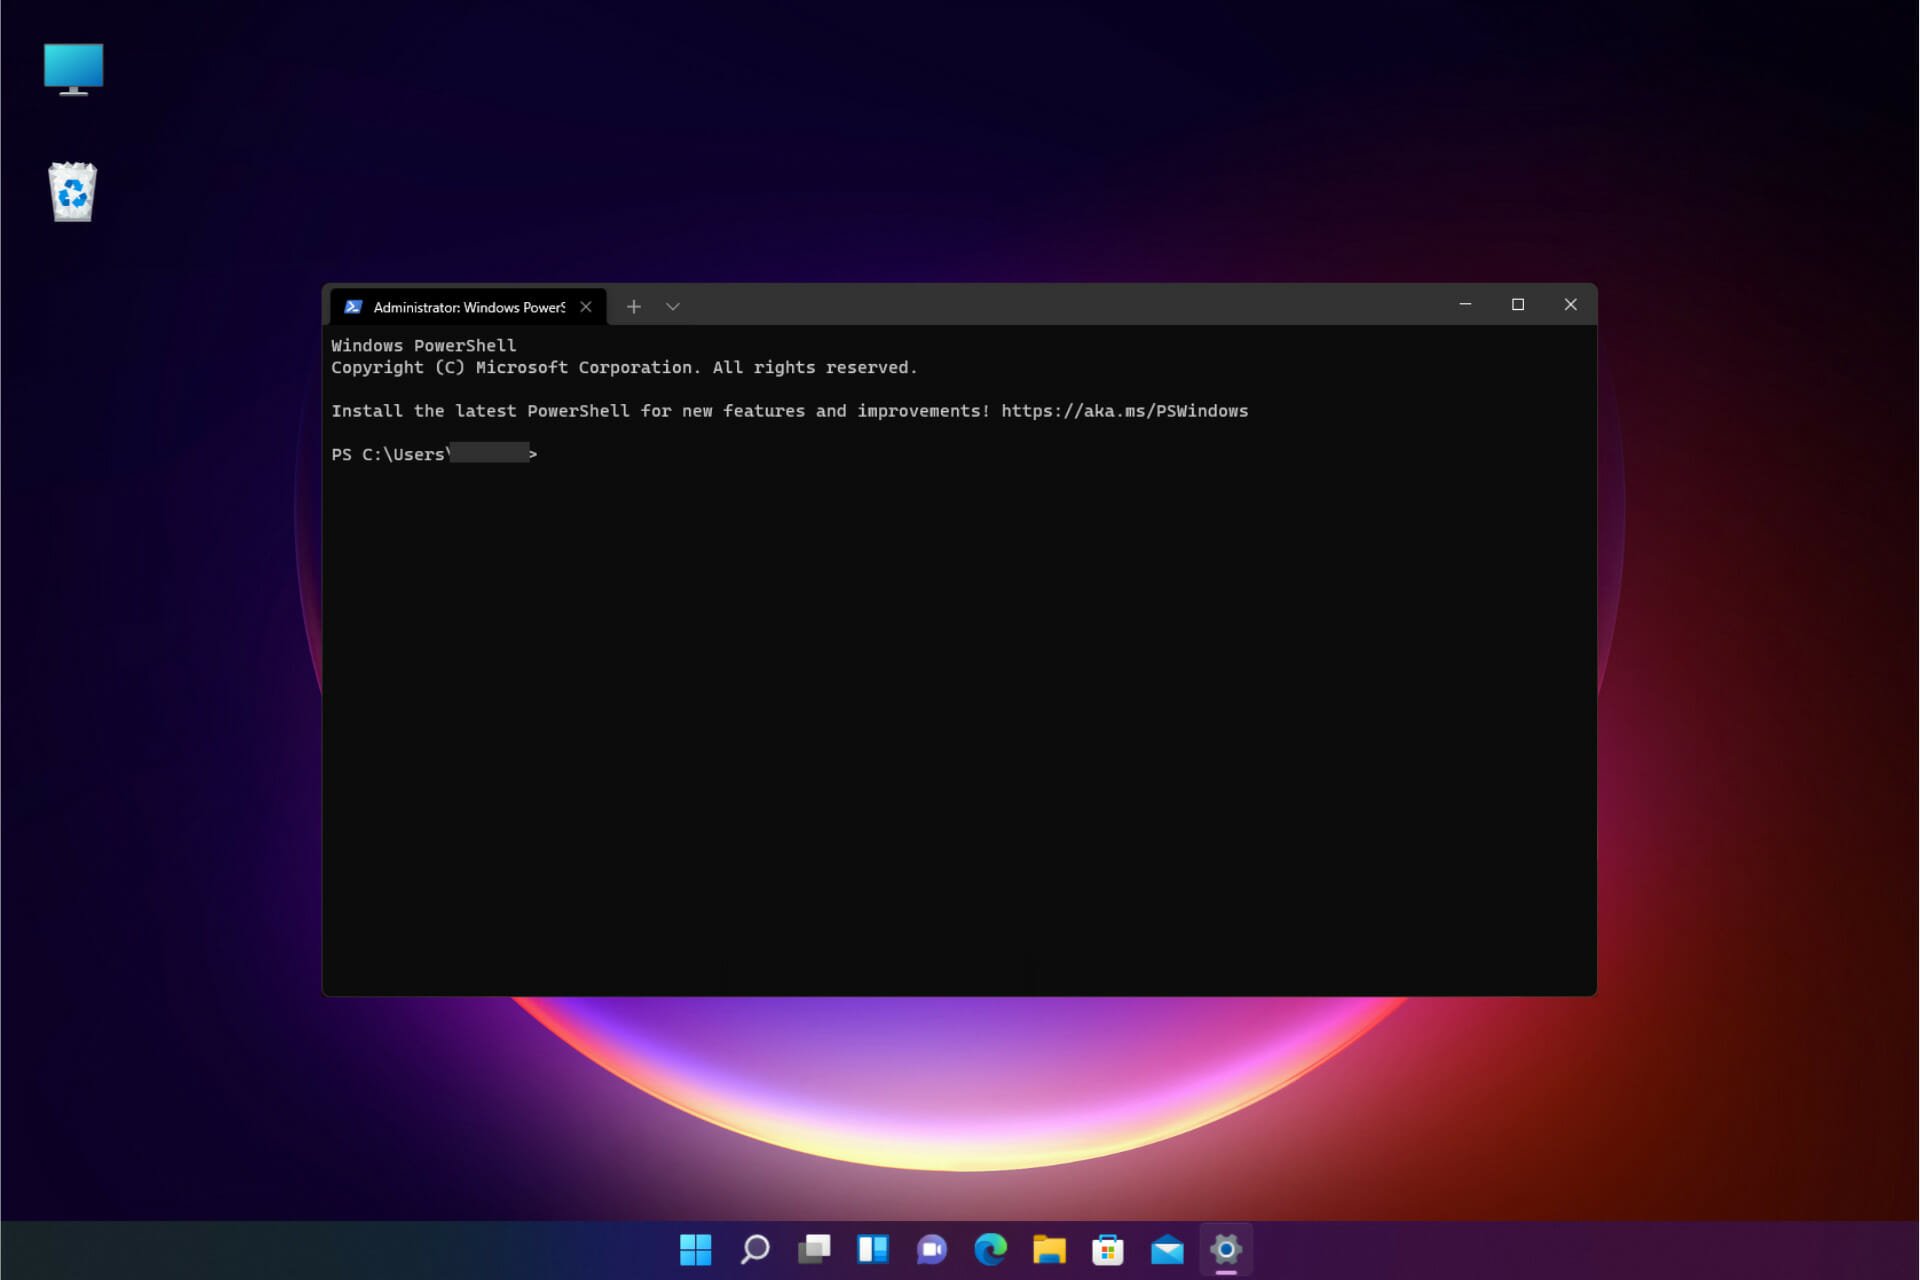 Windows Terminal replaces Command Prompt